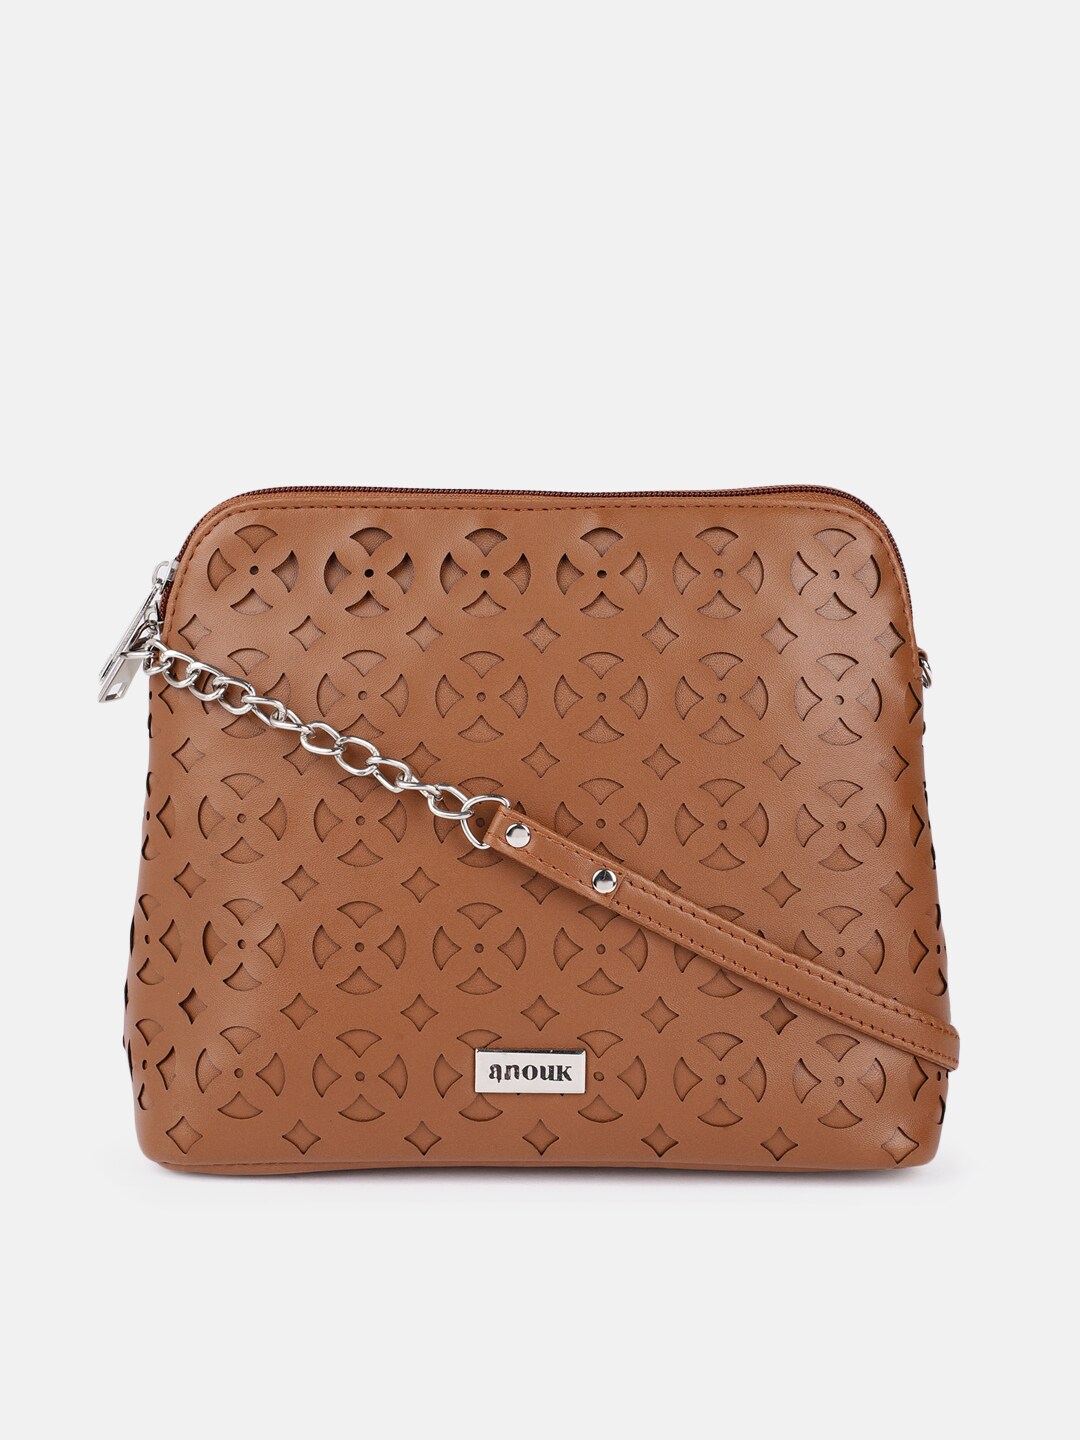 Anouk Brown Solid Sling Bag With Laser Cuts Price in India